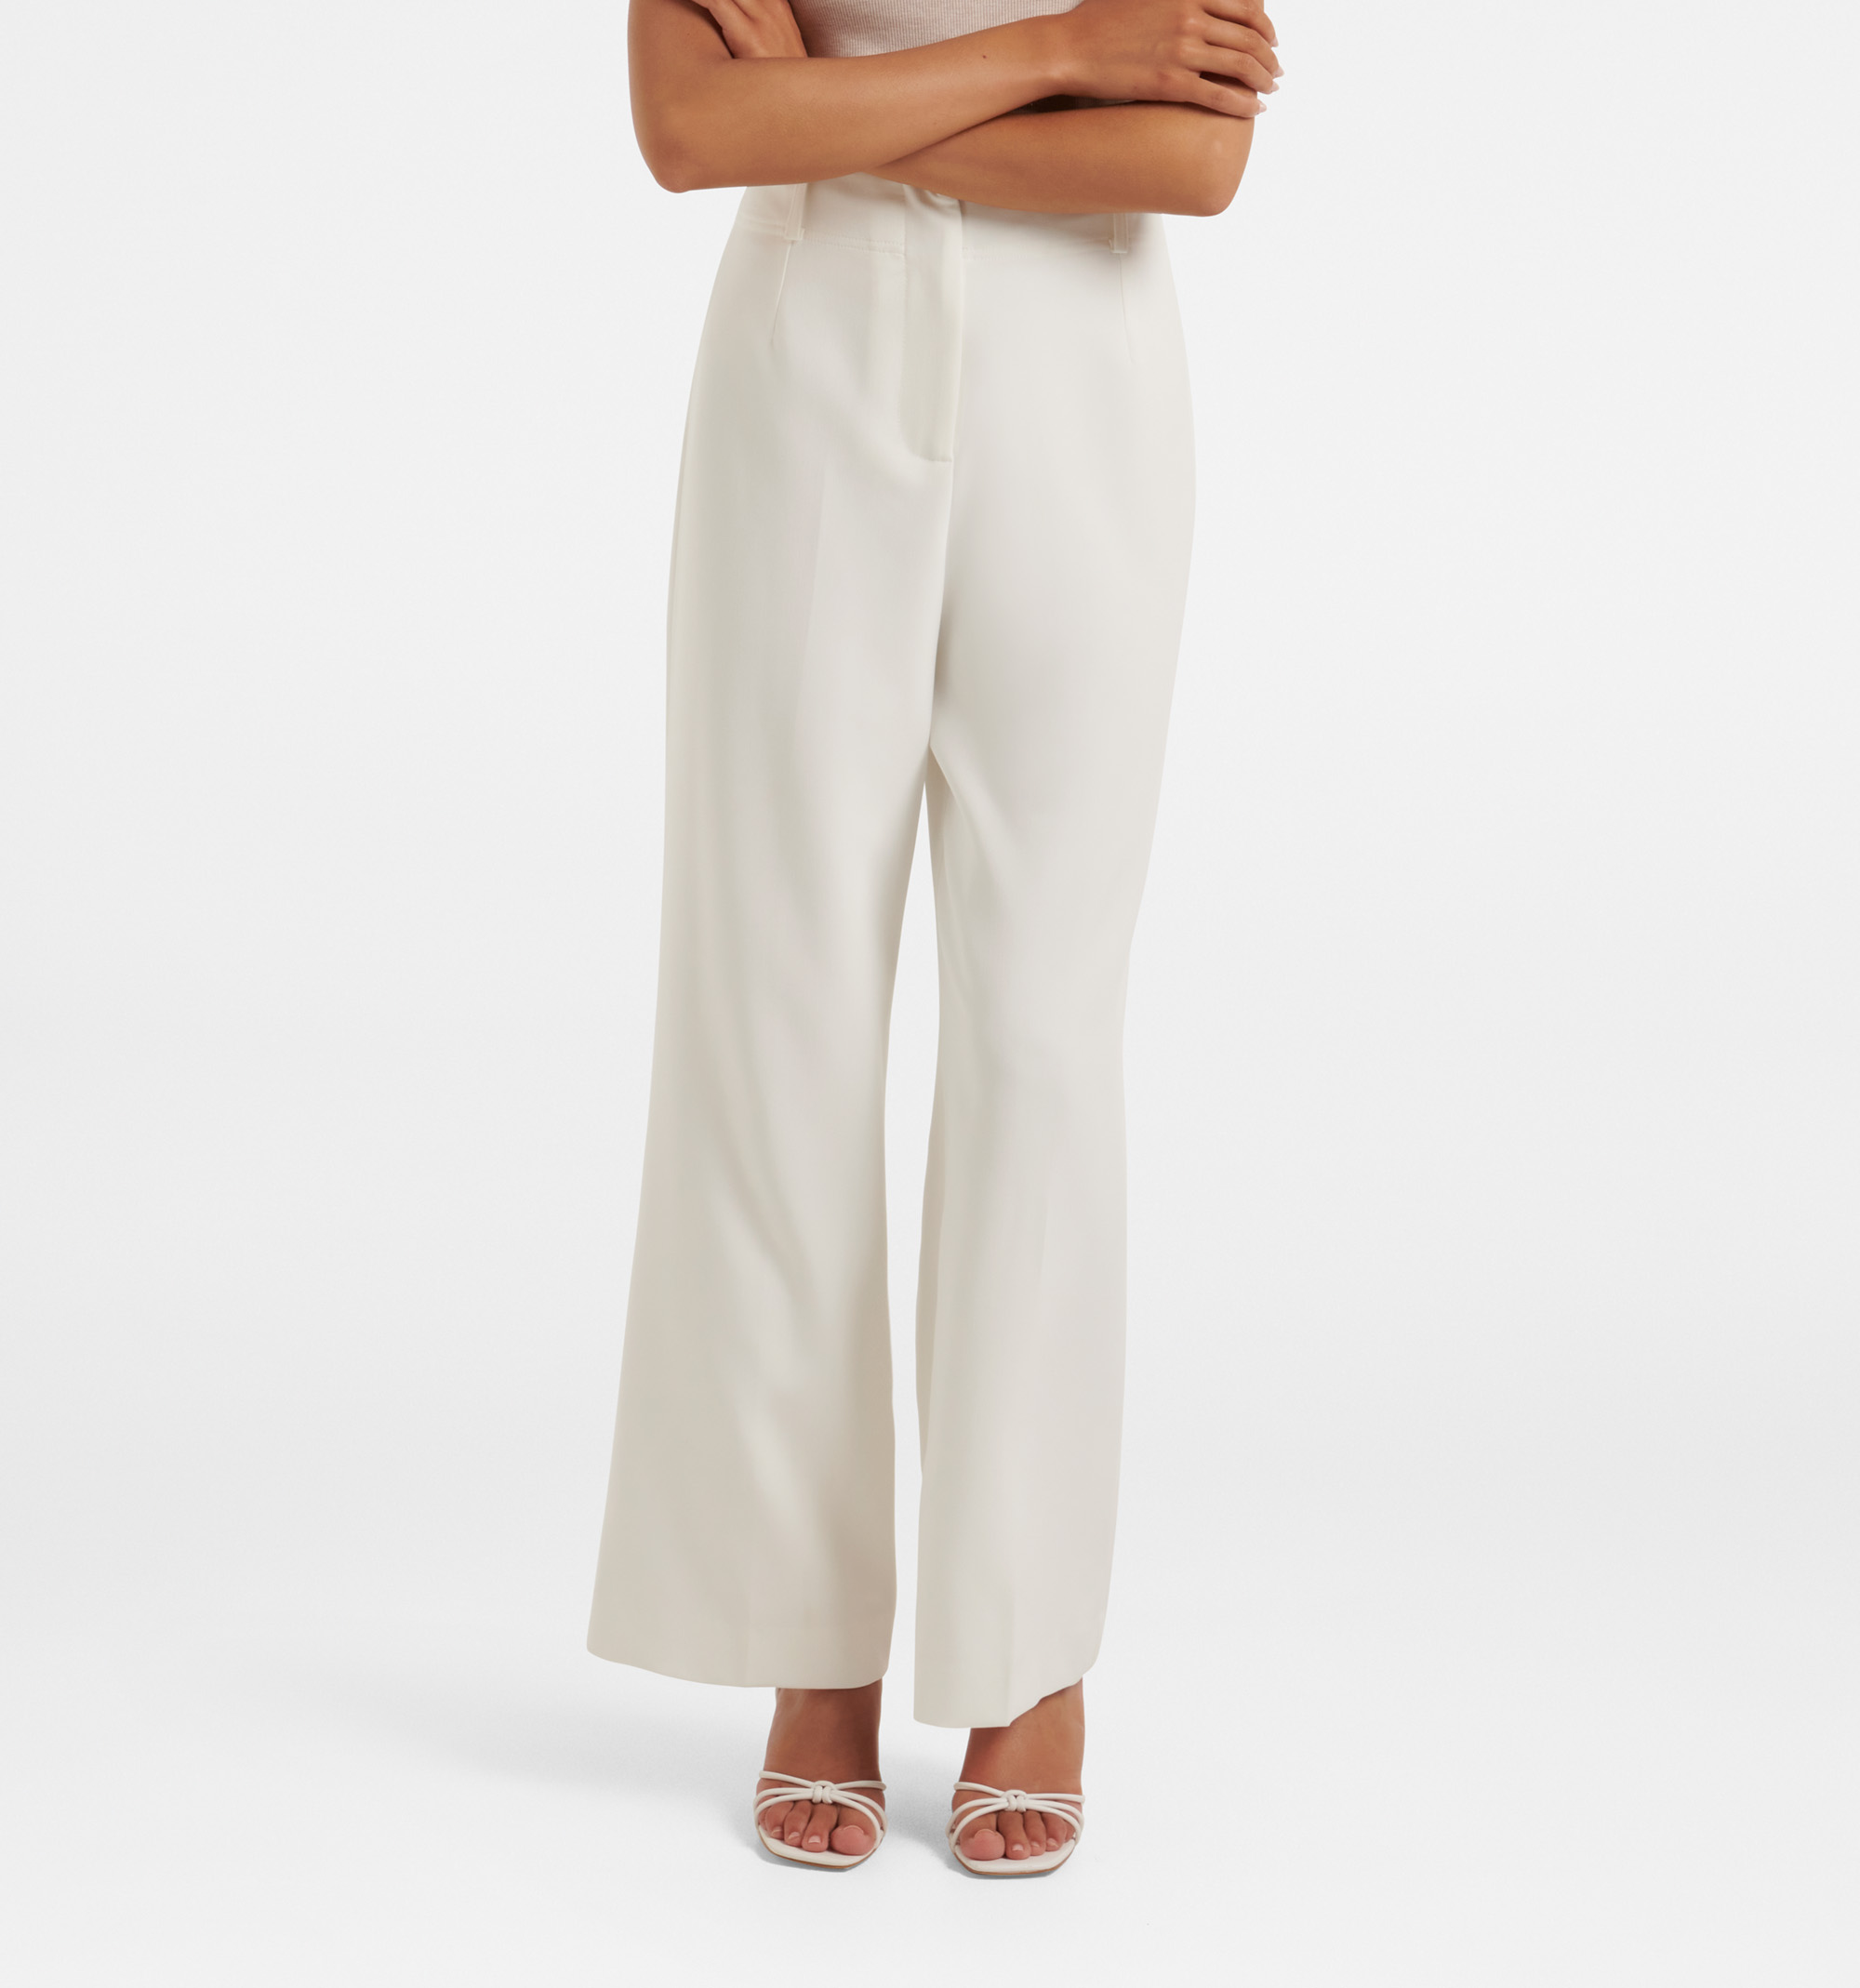 Forever New SELMA PANTS - Cargo trousers - champagne/taupe - Zalando.de